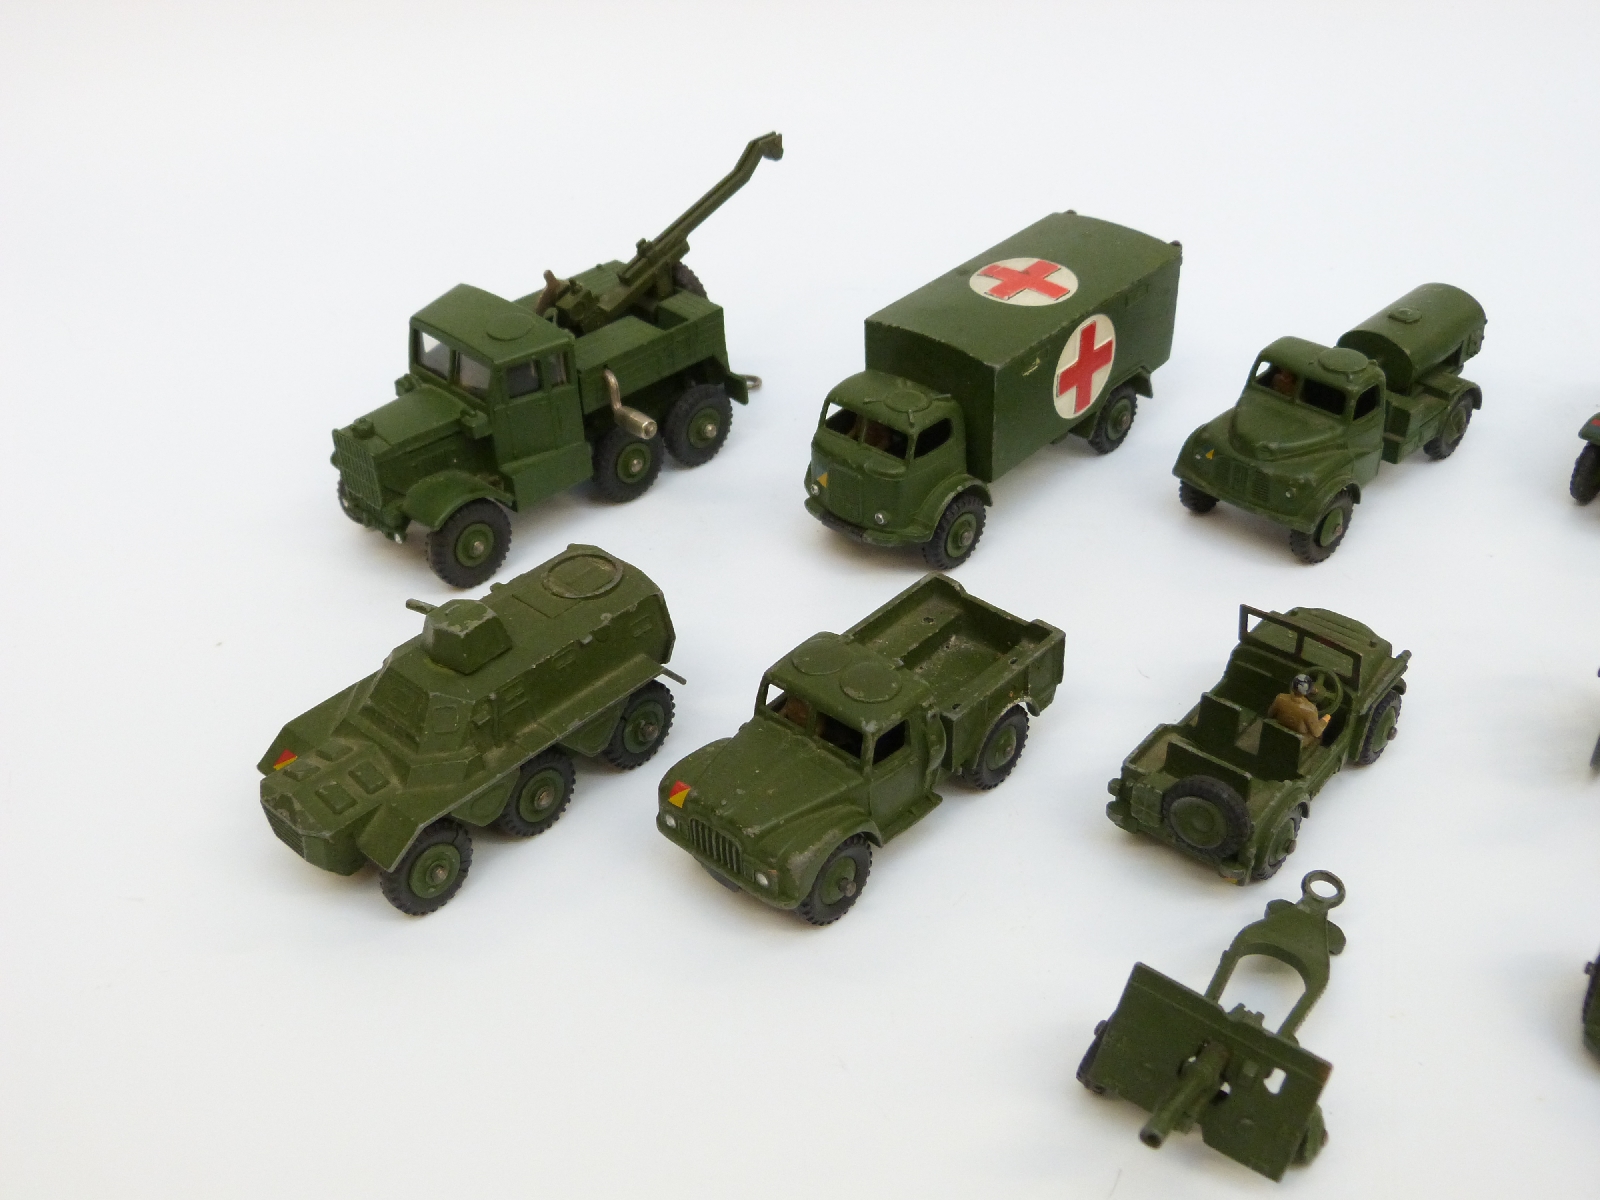 Ten Dinky Toys and Supertoys diecast model military vehicles including Military Ambulance, - Image 3 of 9